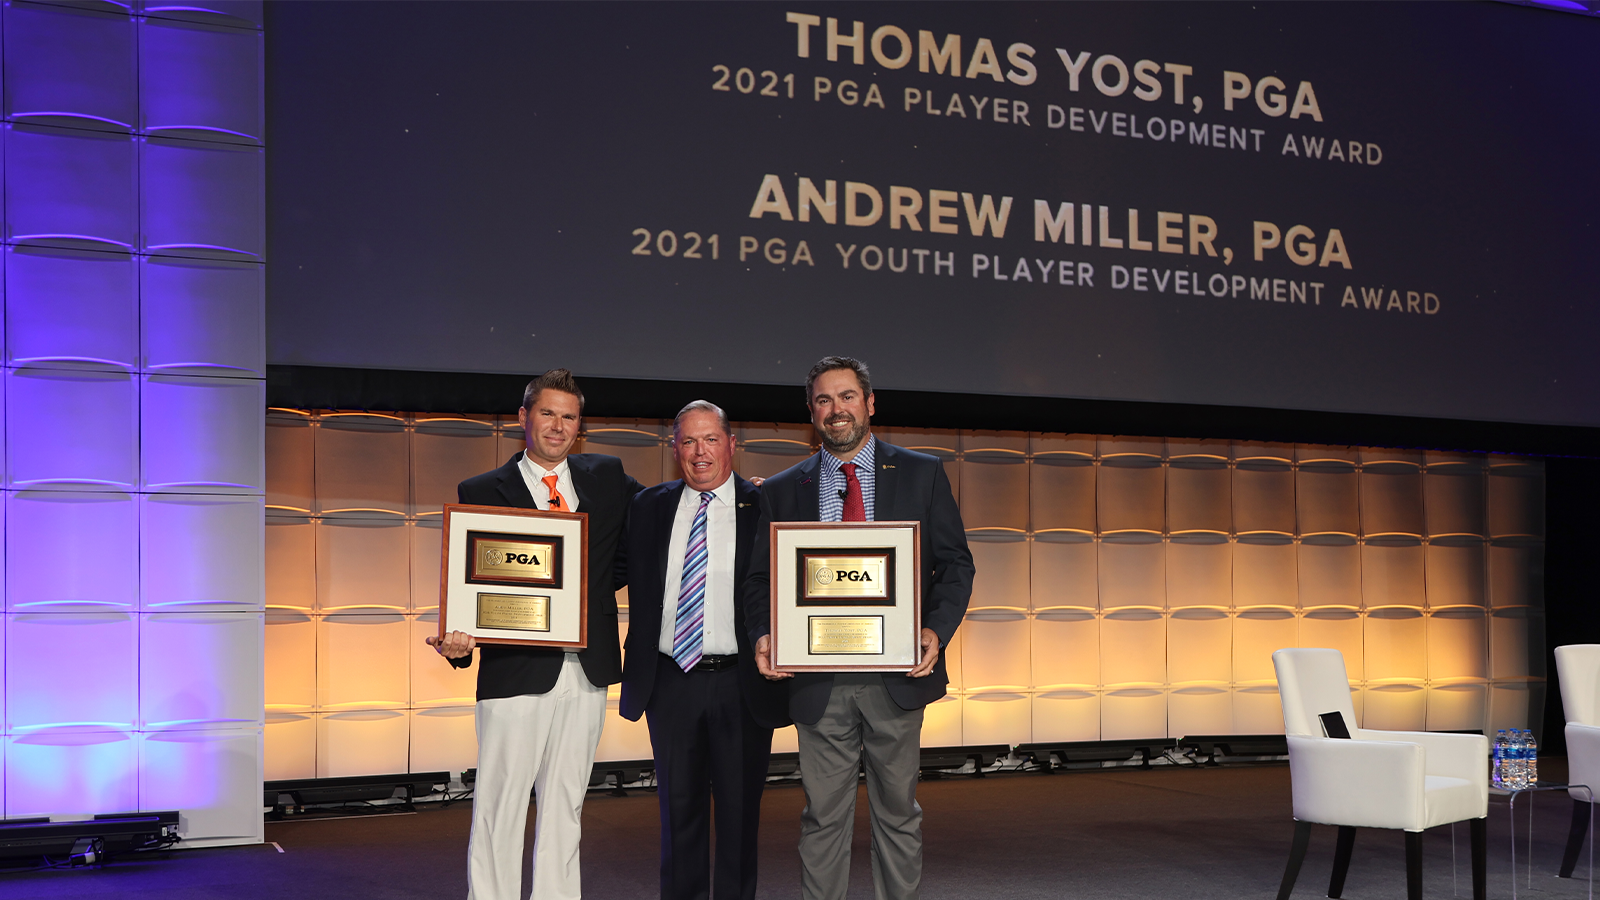 PGA of America President Jim Richerson poses for a photo with winner of the PGA Youth Player Development award Andrew Miller and winner of the PGA Player Development Award Thomas Yost during the PGA Special Awards night for the 106th PGA Annual Meeting at JW Marriott Phoenix Desert Ridge Resort & Spa on Tuesday, November 1, 2022 in Phoenix, Arizona. (Photo by Sam Greenwood/PGA of America)